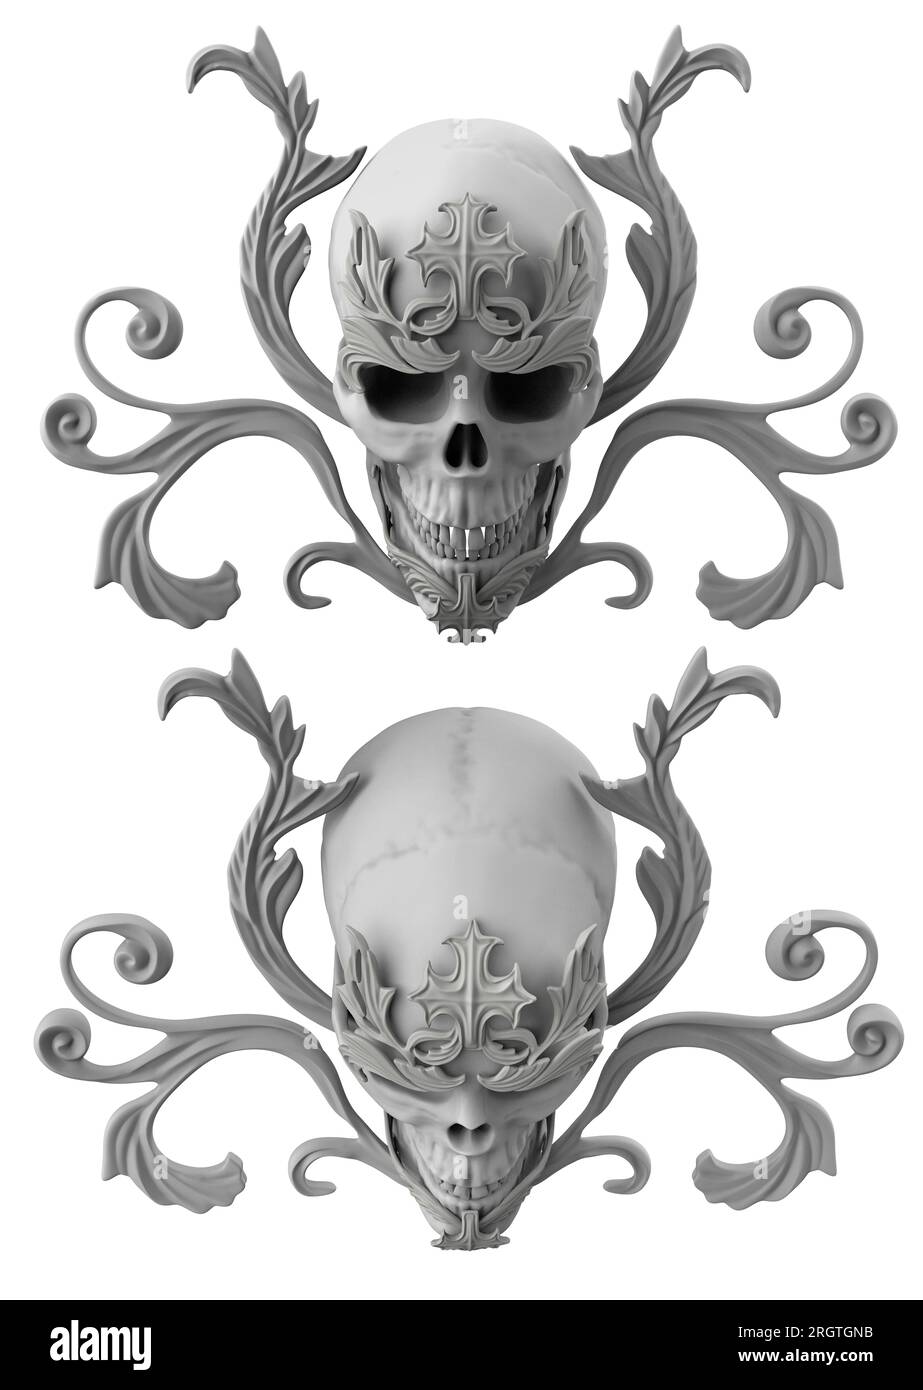 Isolated 3d render illustration of clay gothic baroque ornate heraldic skull in various angles. Stock Photo